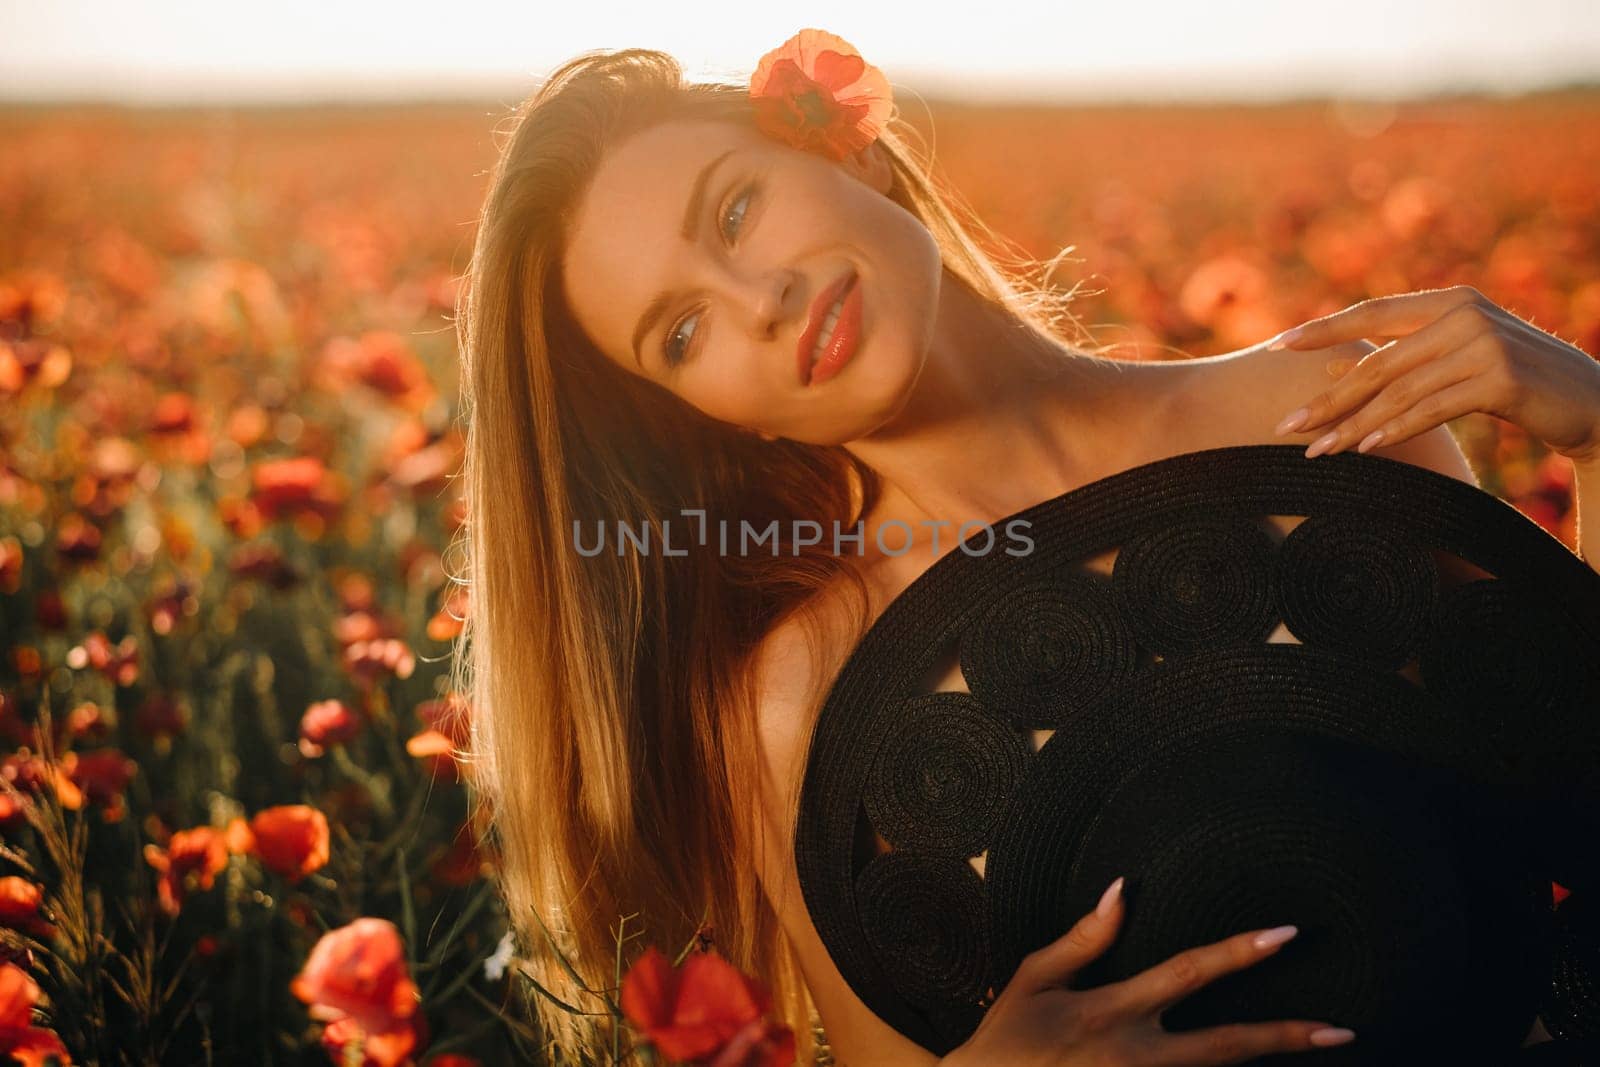 naked girl with a black hat in her hands in a poppy field at sunset by Lobachad